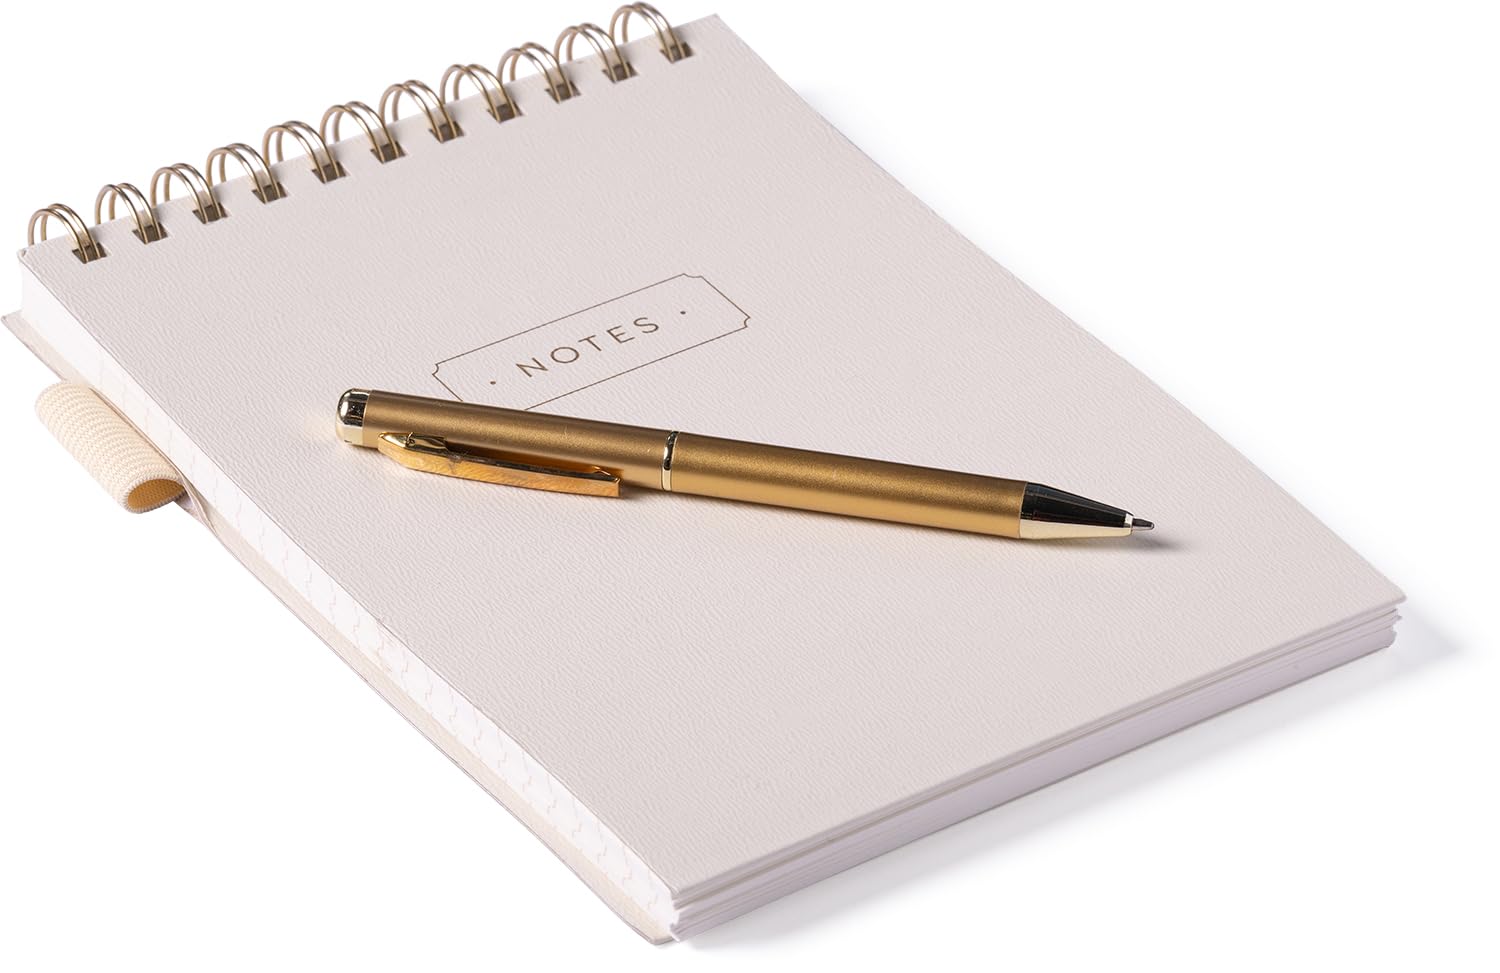 Flexi-Cover Steno Pad with Pen Included for Note Taking